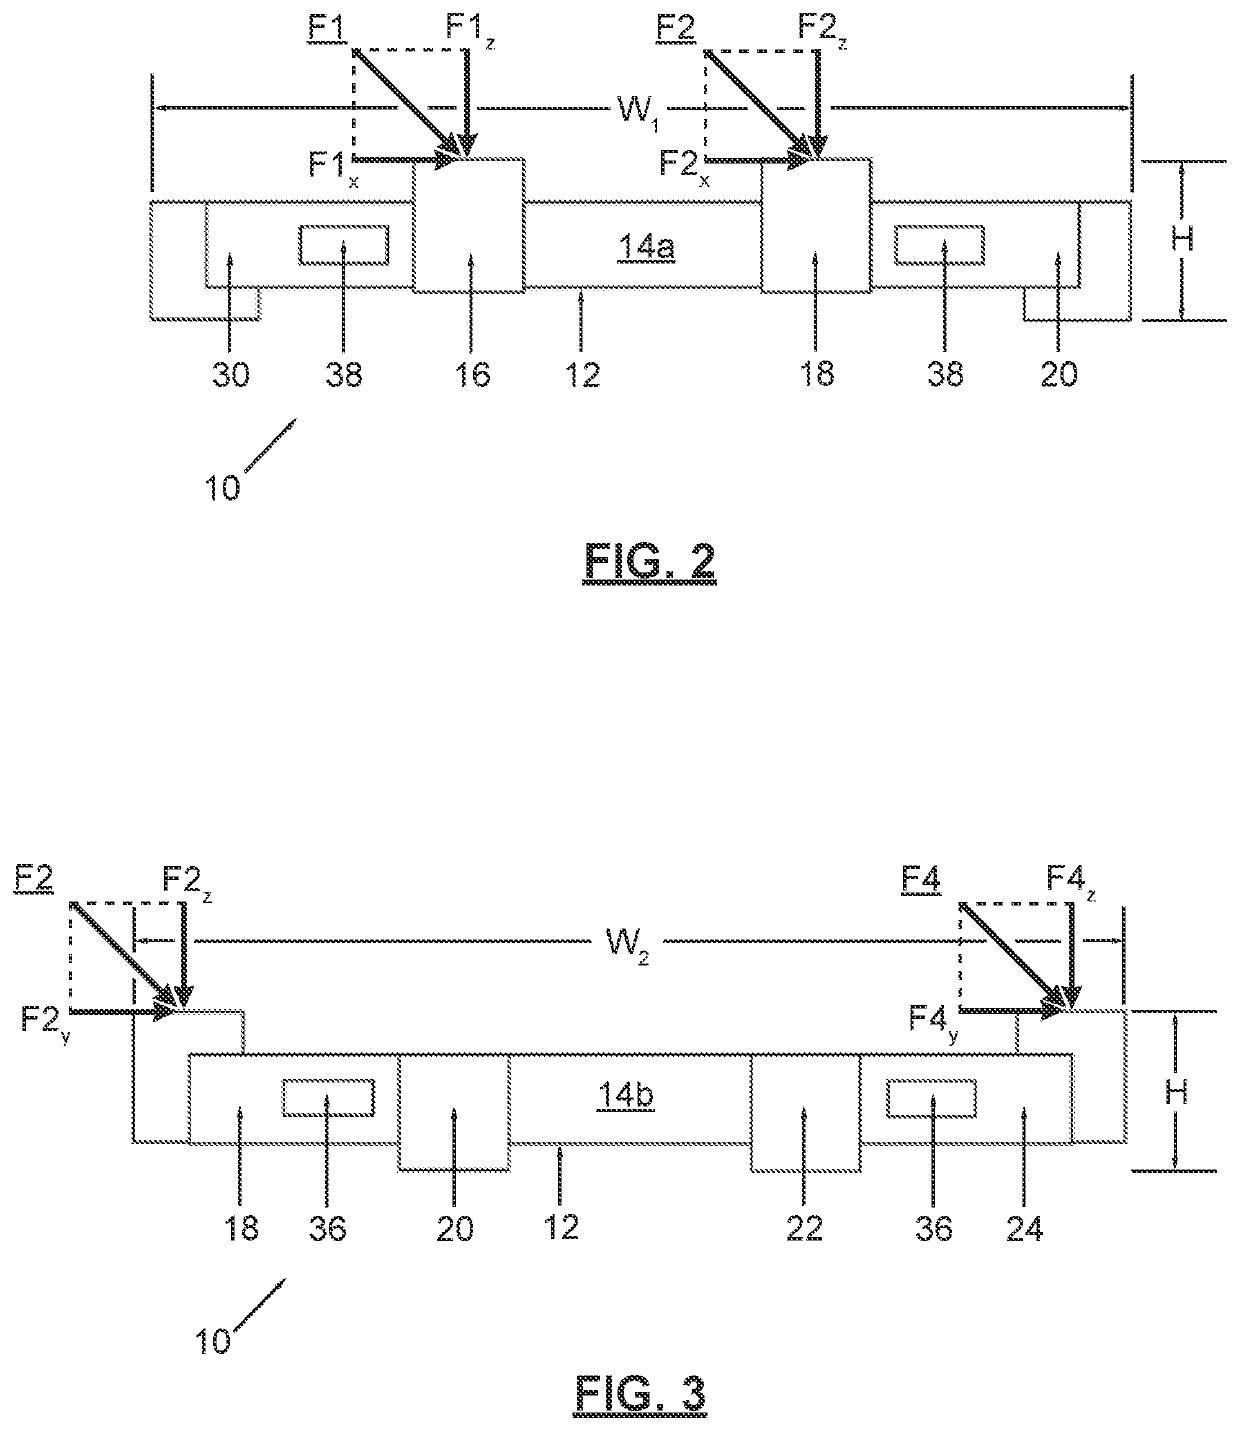 Force measurement system and a method of calibrating the same